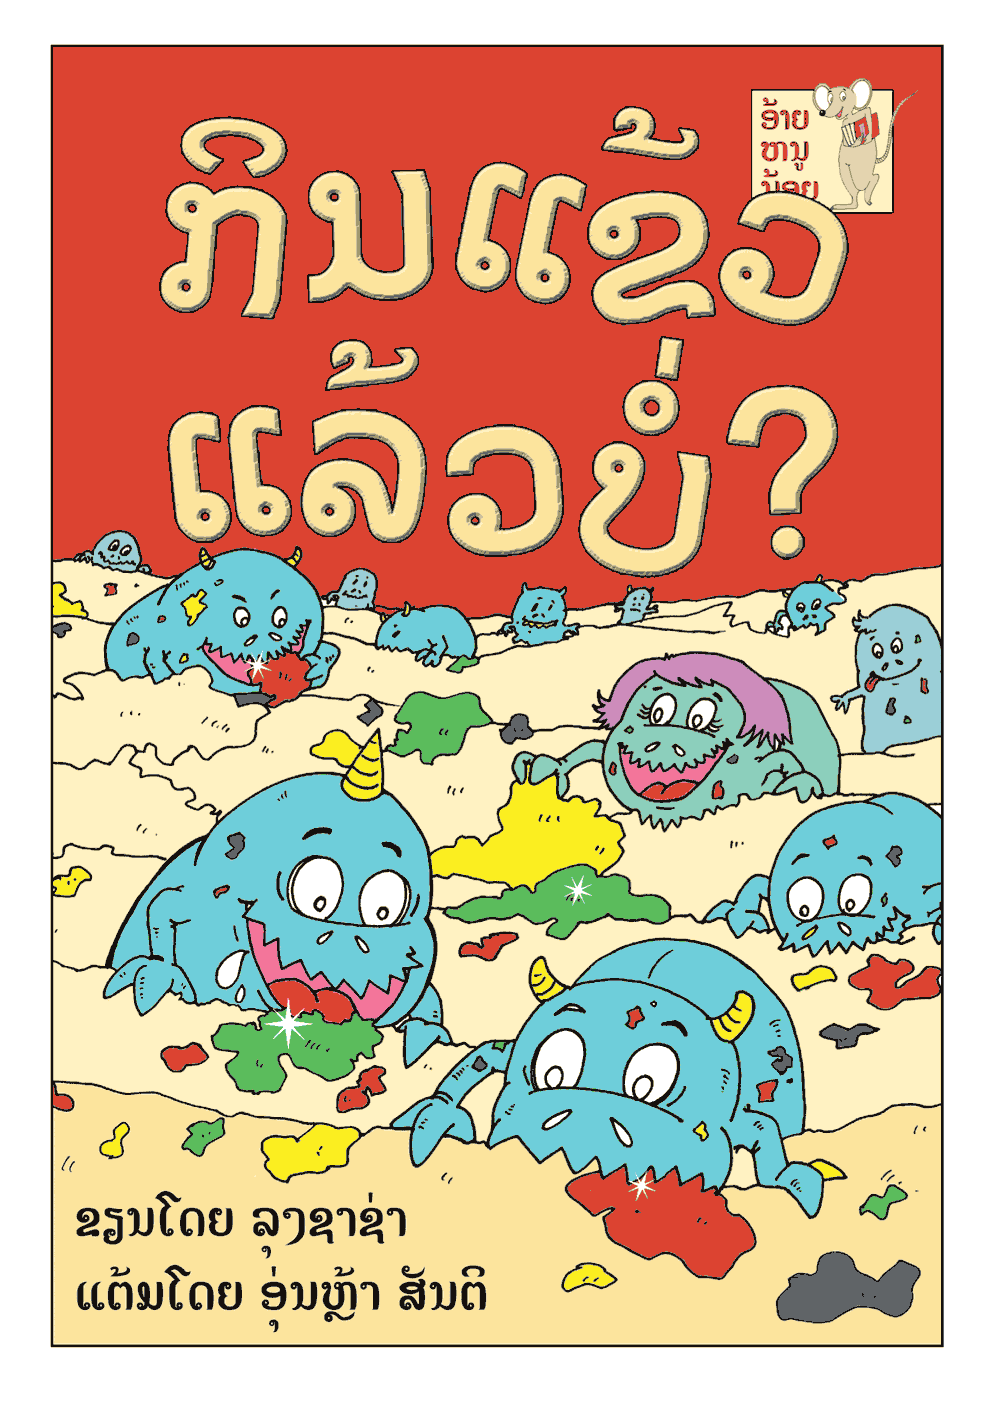 Eat Tooth? large book cover, published in Lao language